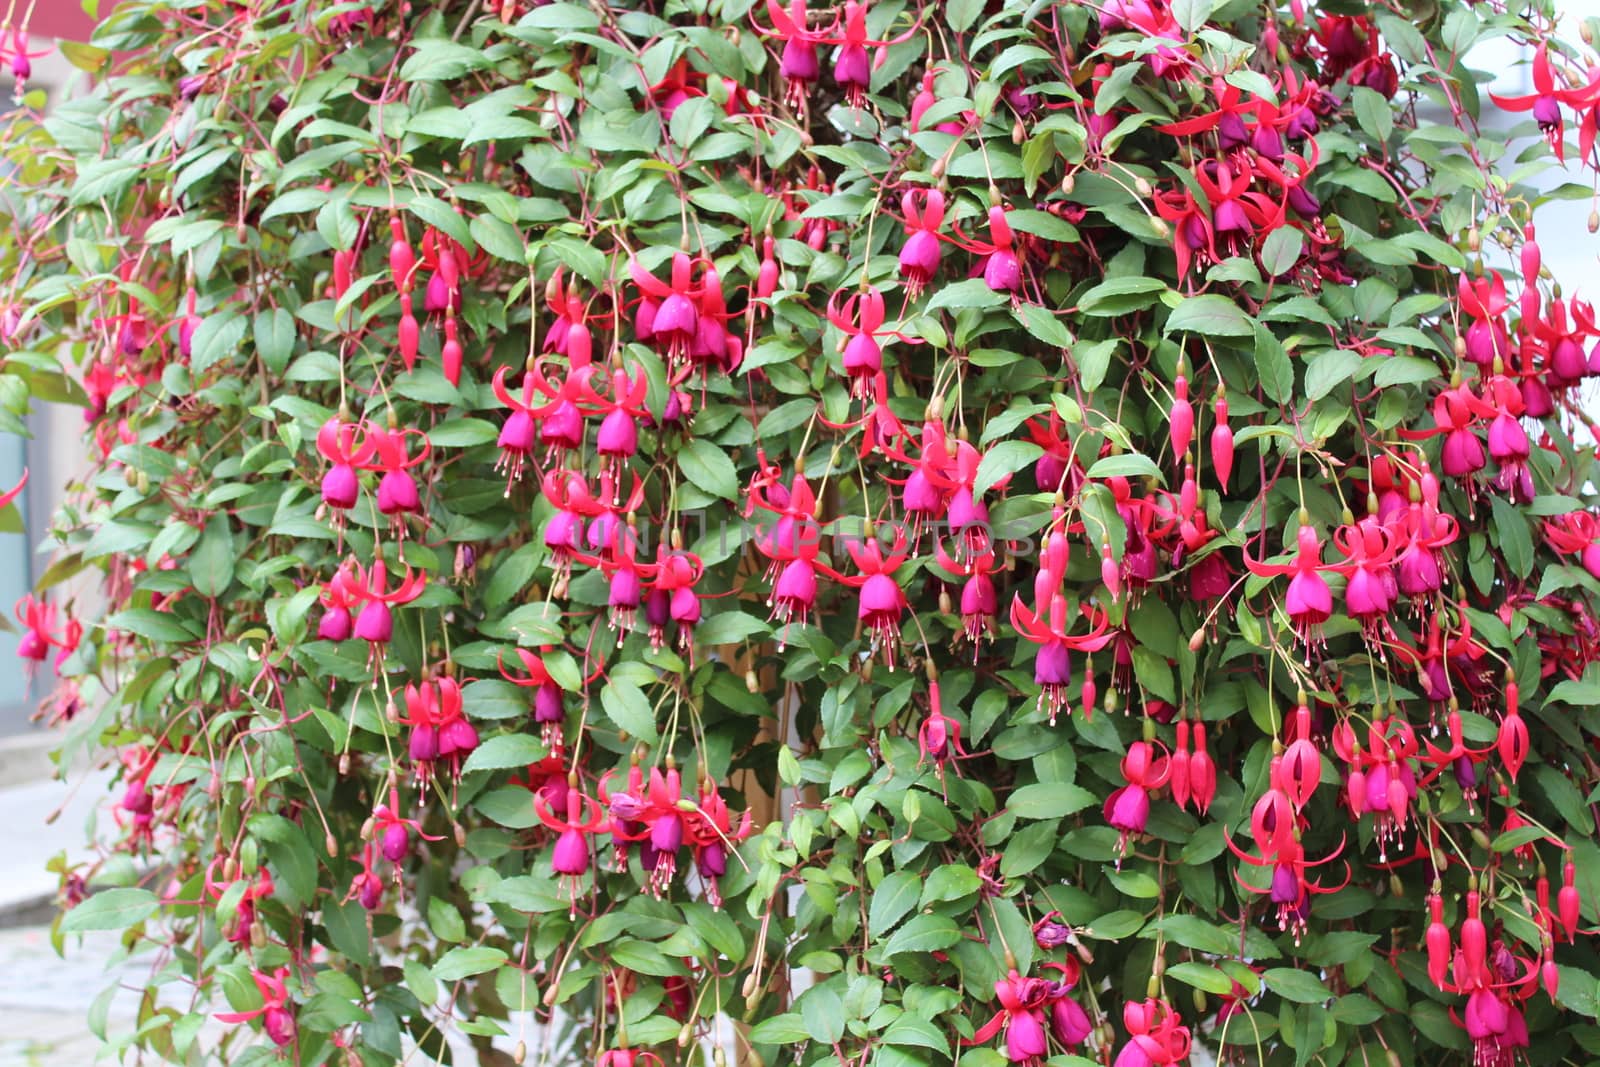 The picture shows pink fuchsia in the garden